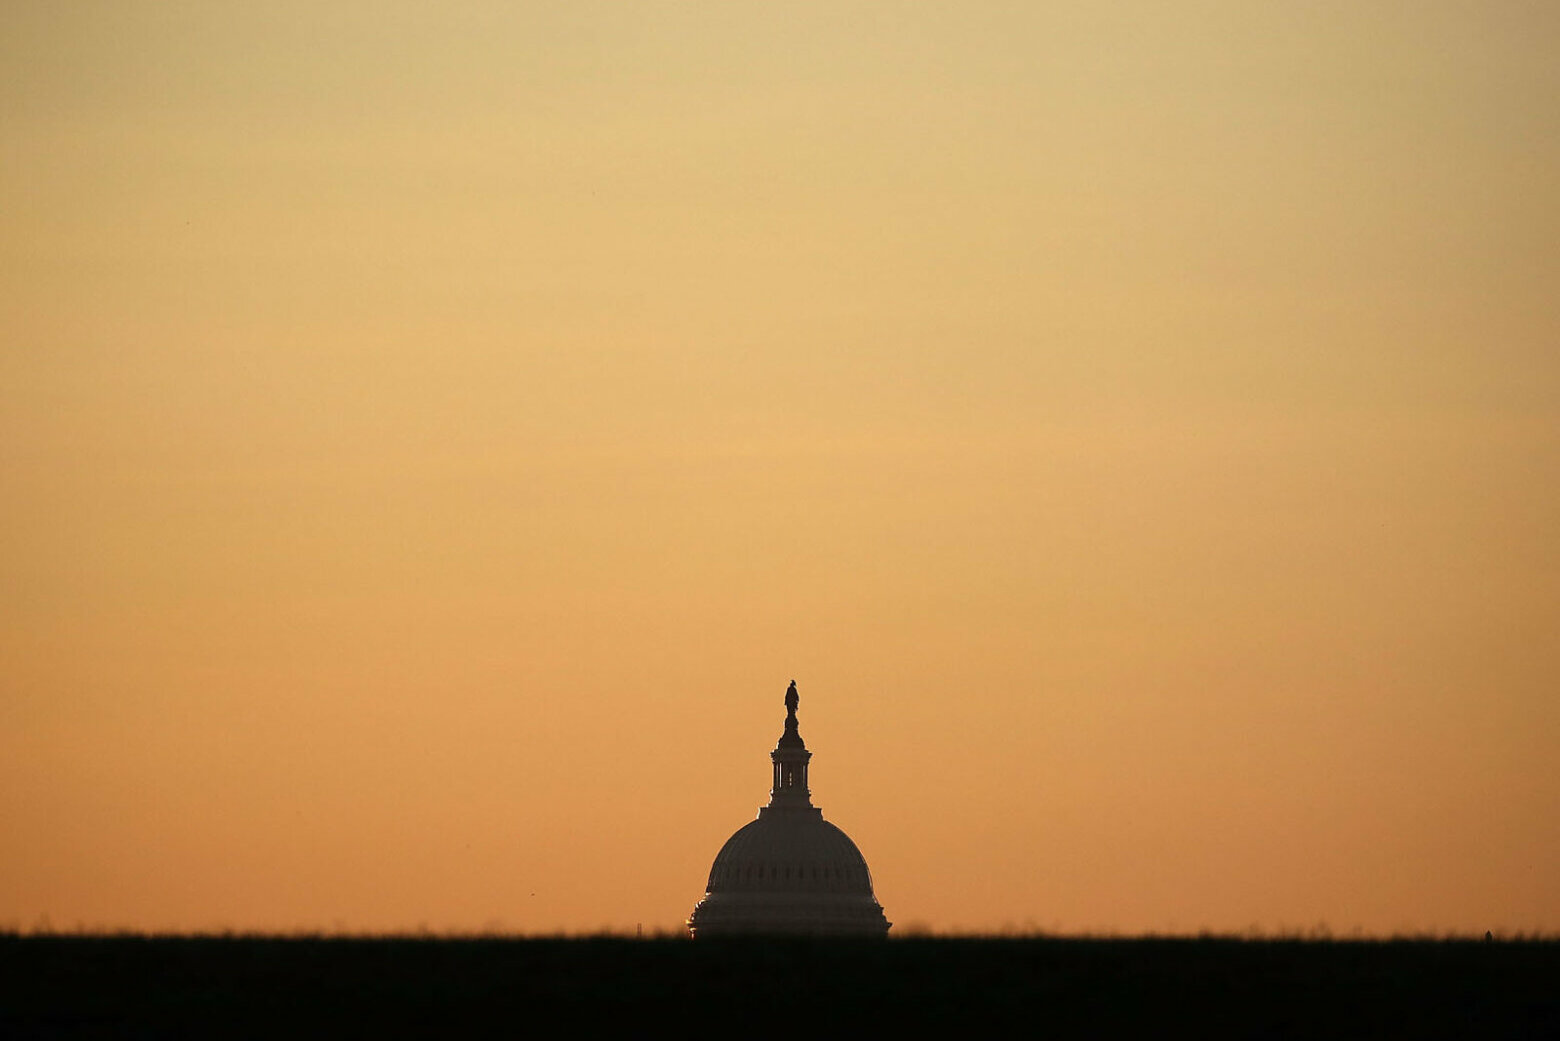 WASHINGTON, DC - JULY 21: The early morning sun begins to rise over the US Capitol, on July 21, 2016 in Washington, DC. Washington area temperatures are forecasted to reach the upper 90s for the next few days. (Photo by Mark Wilson/Getty Images)